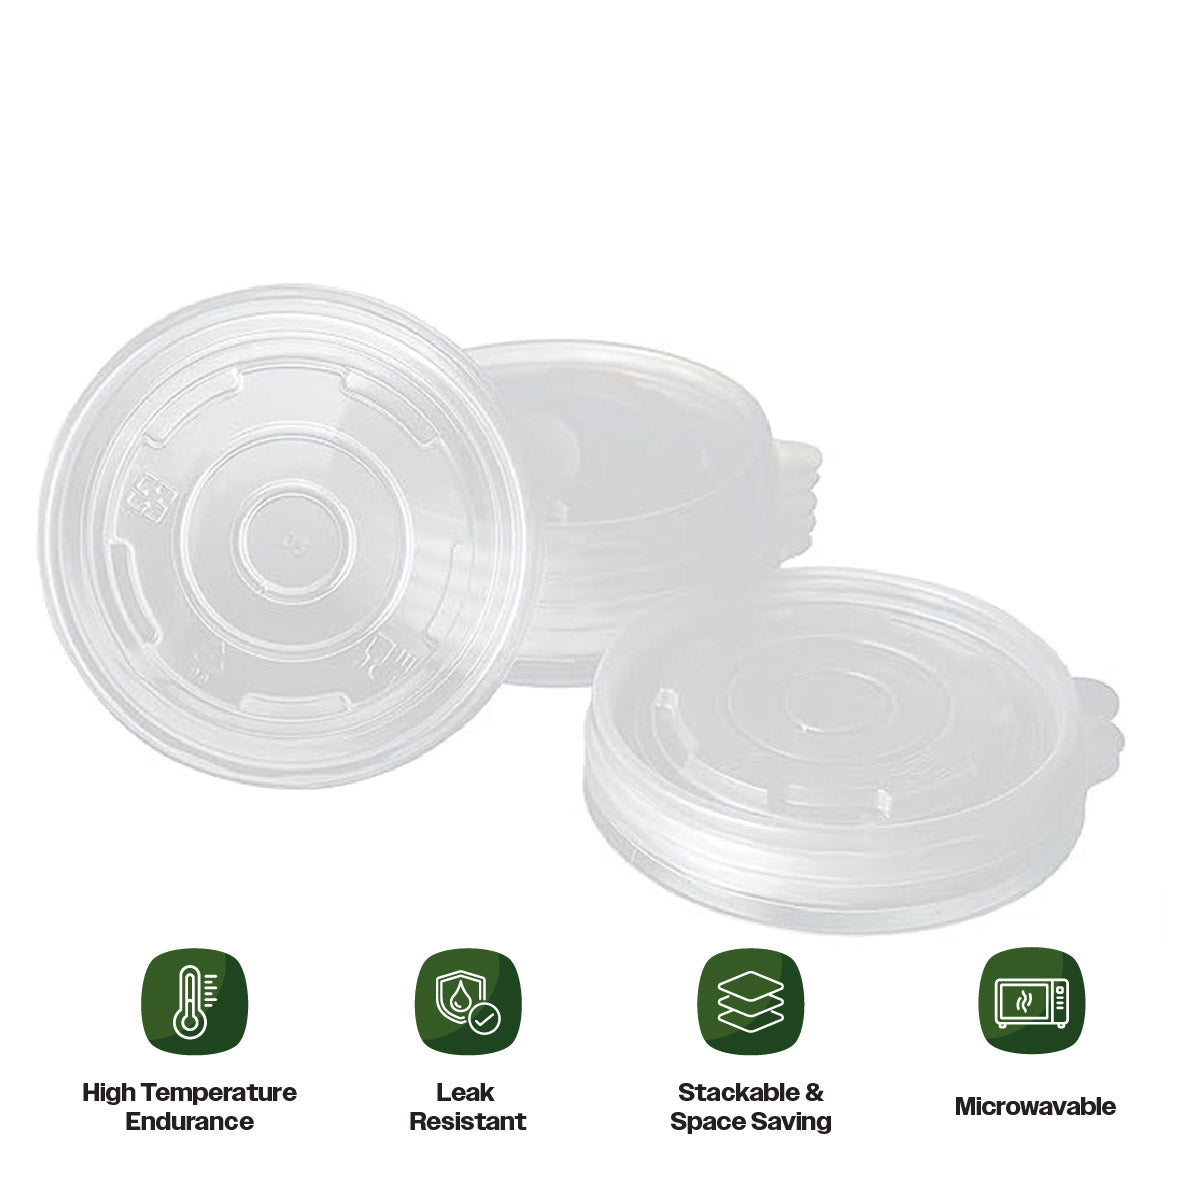 CIAO! 115mm PP Lid for 12,16,24 oz Paper Container (500/case)